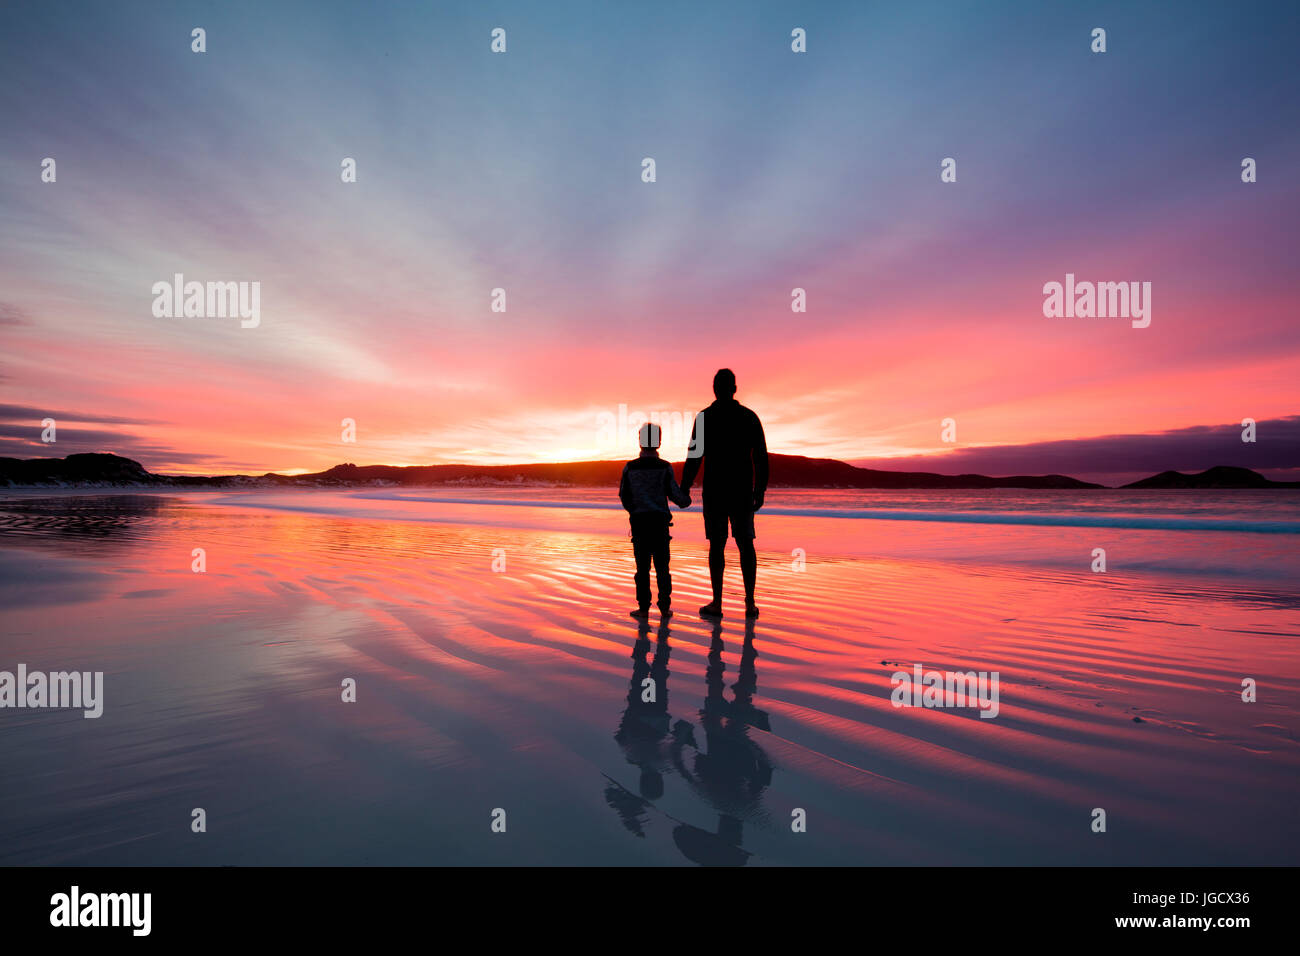 Silhouette of a father and son holding hands on beach at sunset, Western Australia, Australia Stock Photo